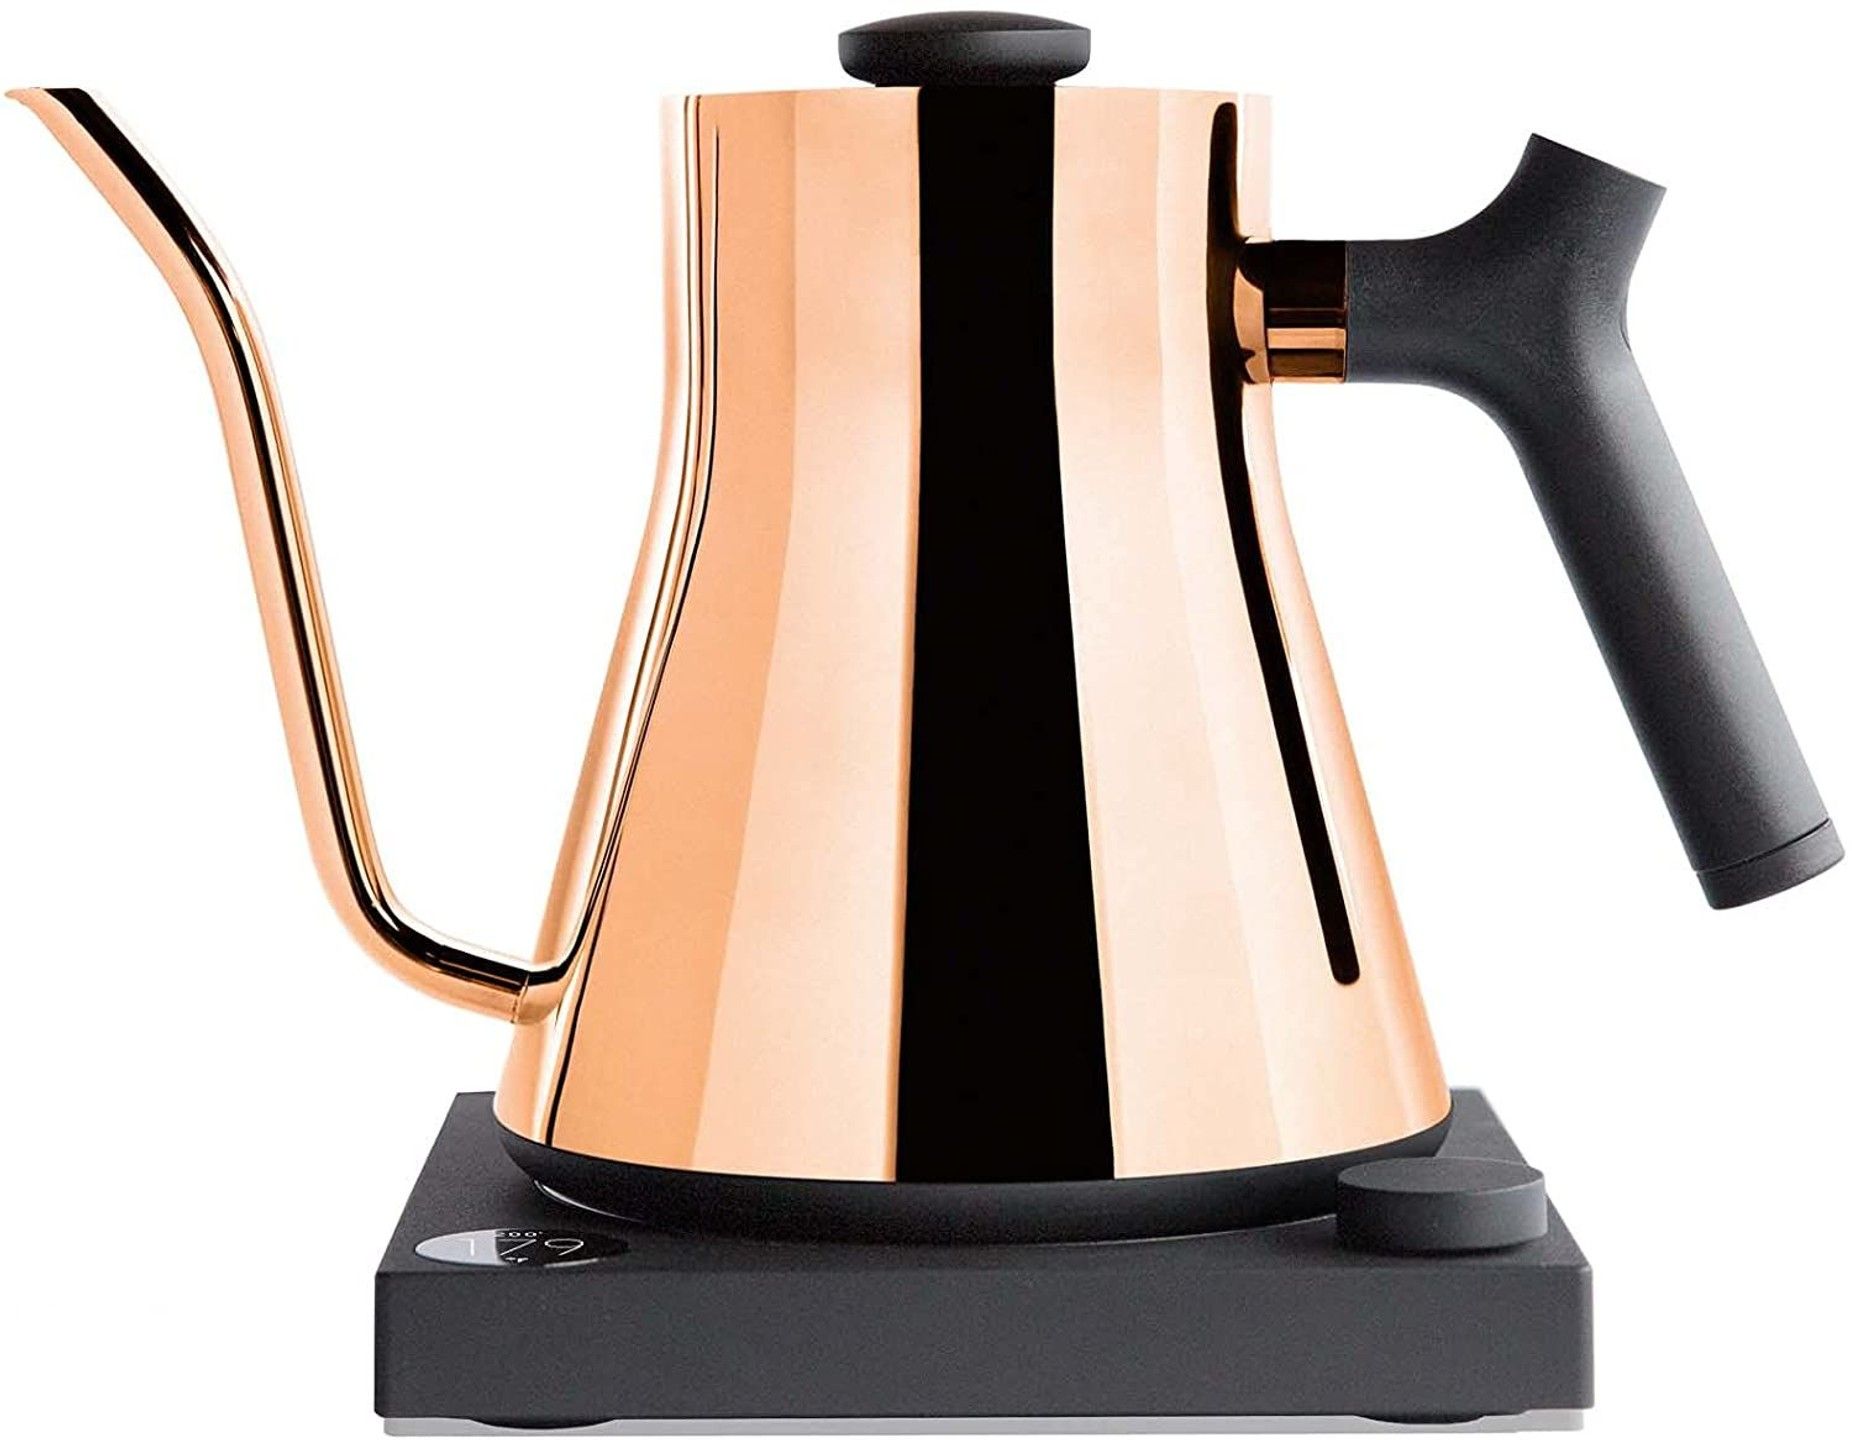 Fellow Electric Pour-Over Kettle